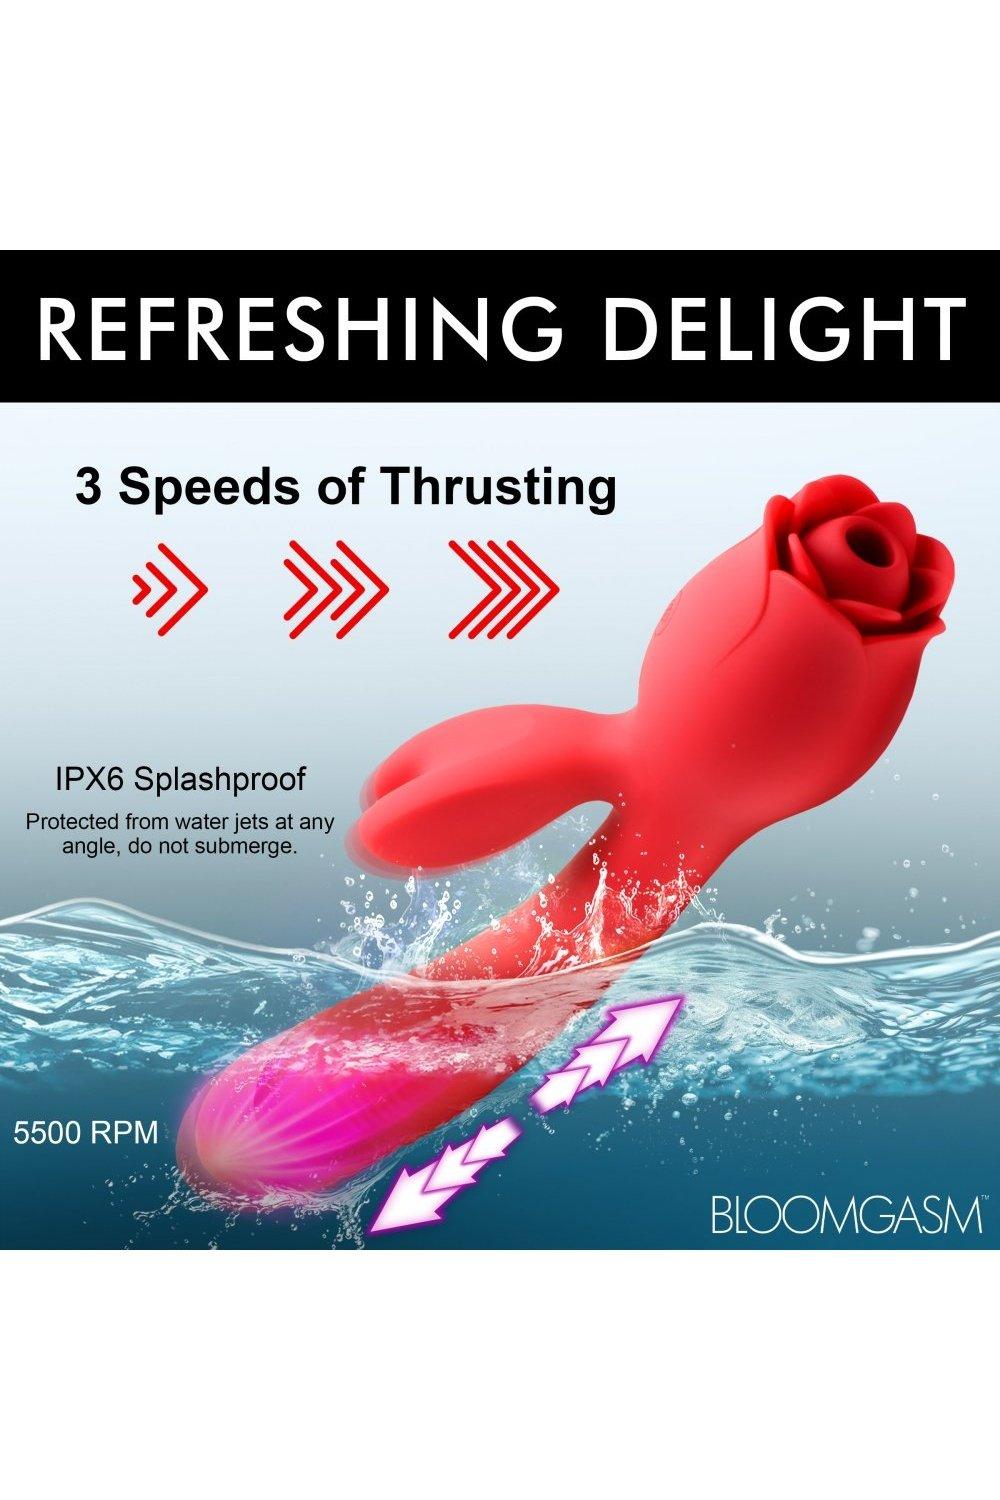 Blooming Bunny Sucking and Thrusting Silicone Rabbit Vibrator - Sex On the Go